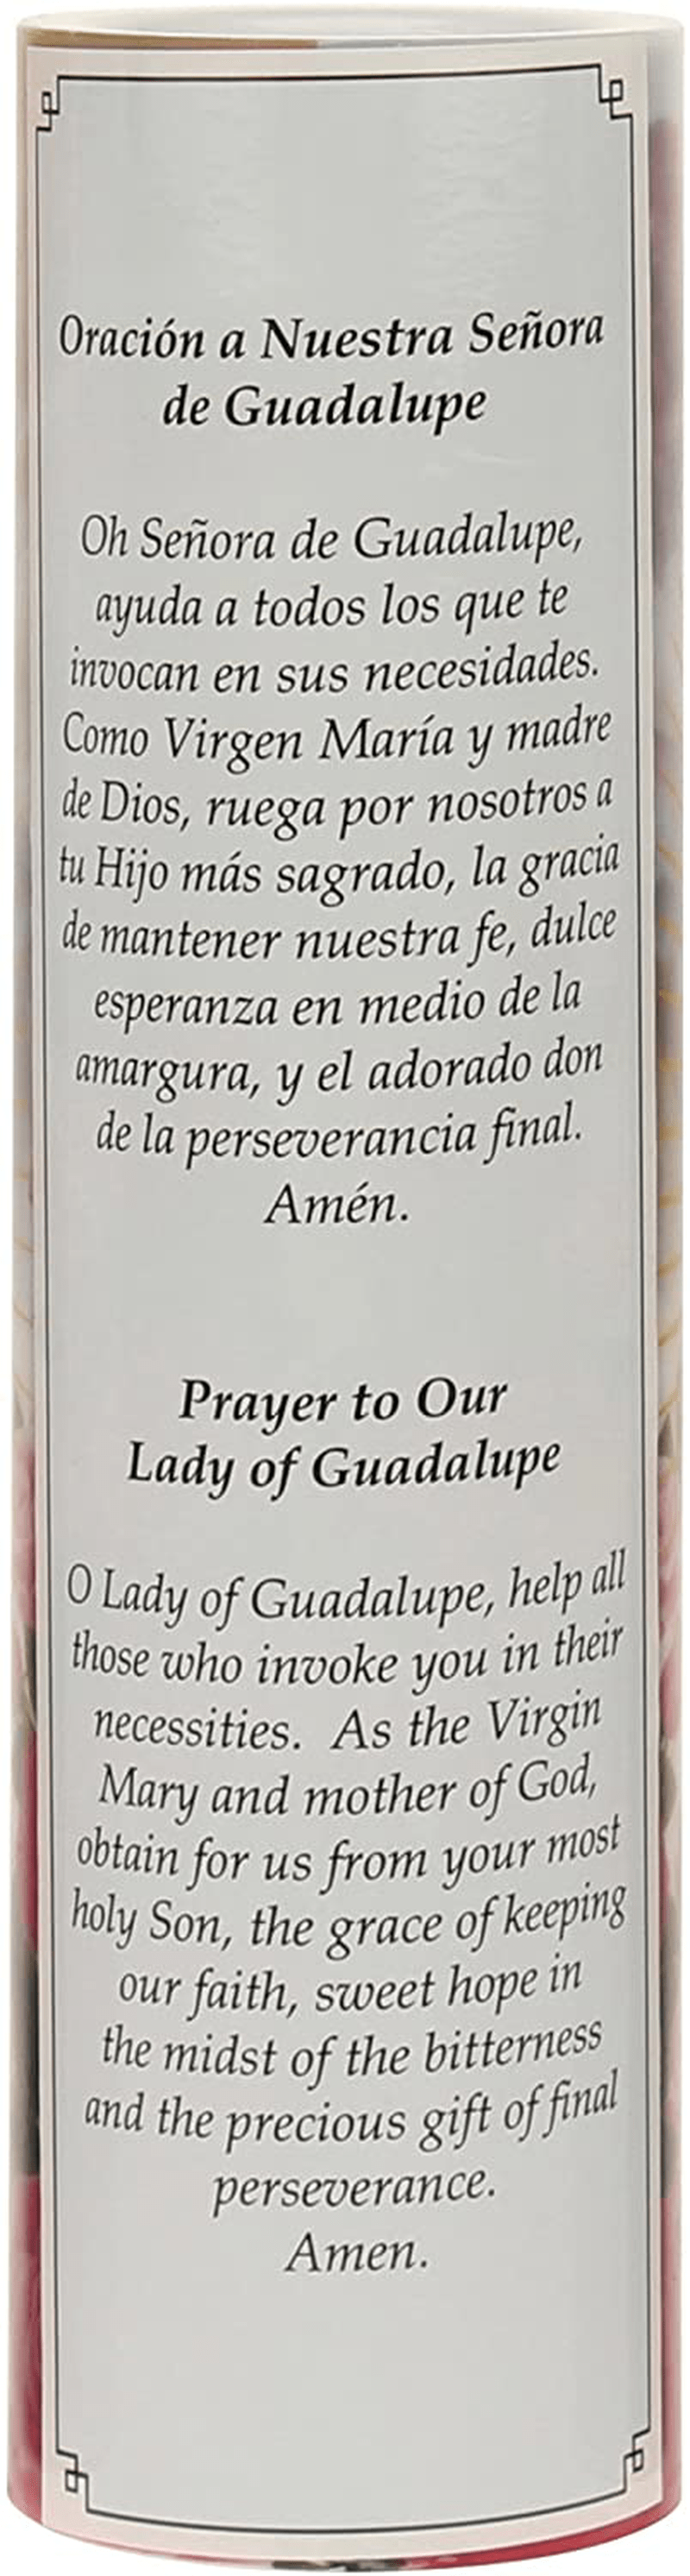 Virgin of Guadalupe Flameless LED Prayer Candle, Unique Religious Decoration, Gift Idea for Mothers Day, Birthday, or Any Holiday Home & Garden > Decor > Home Fragrances > Candles Stonebriar   